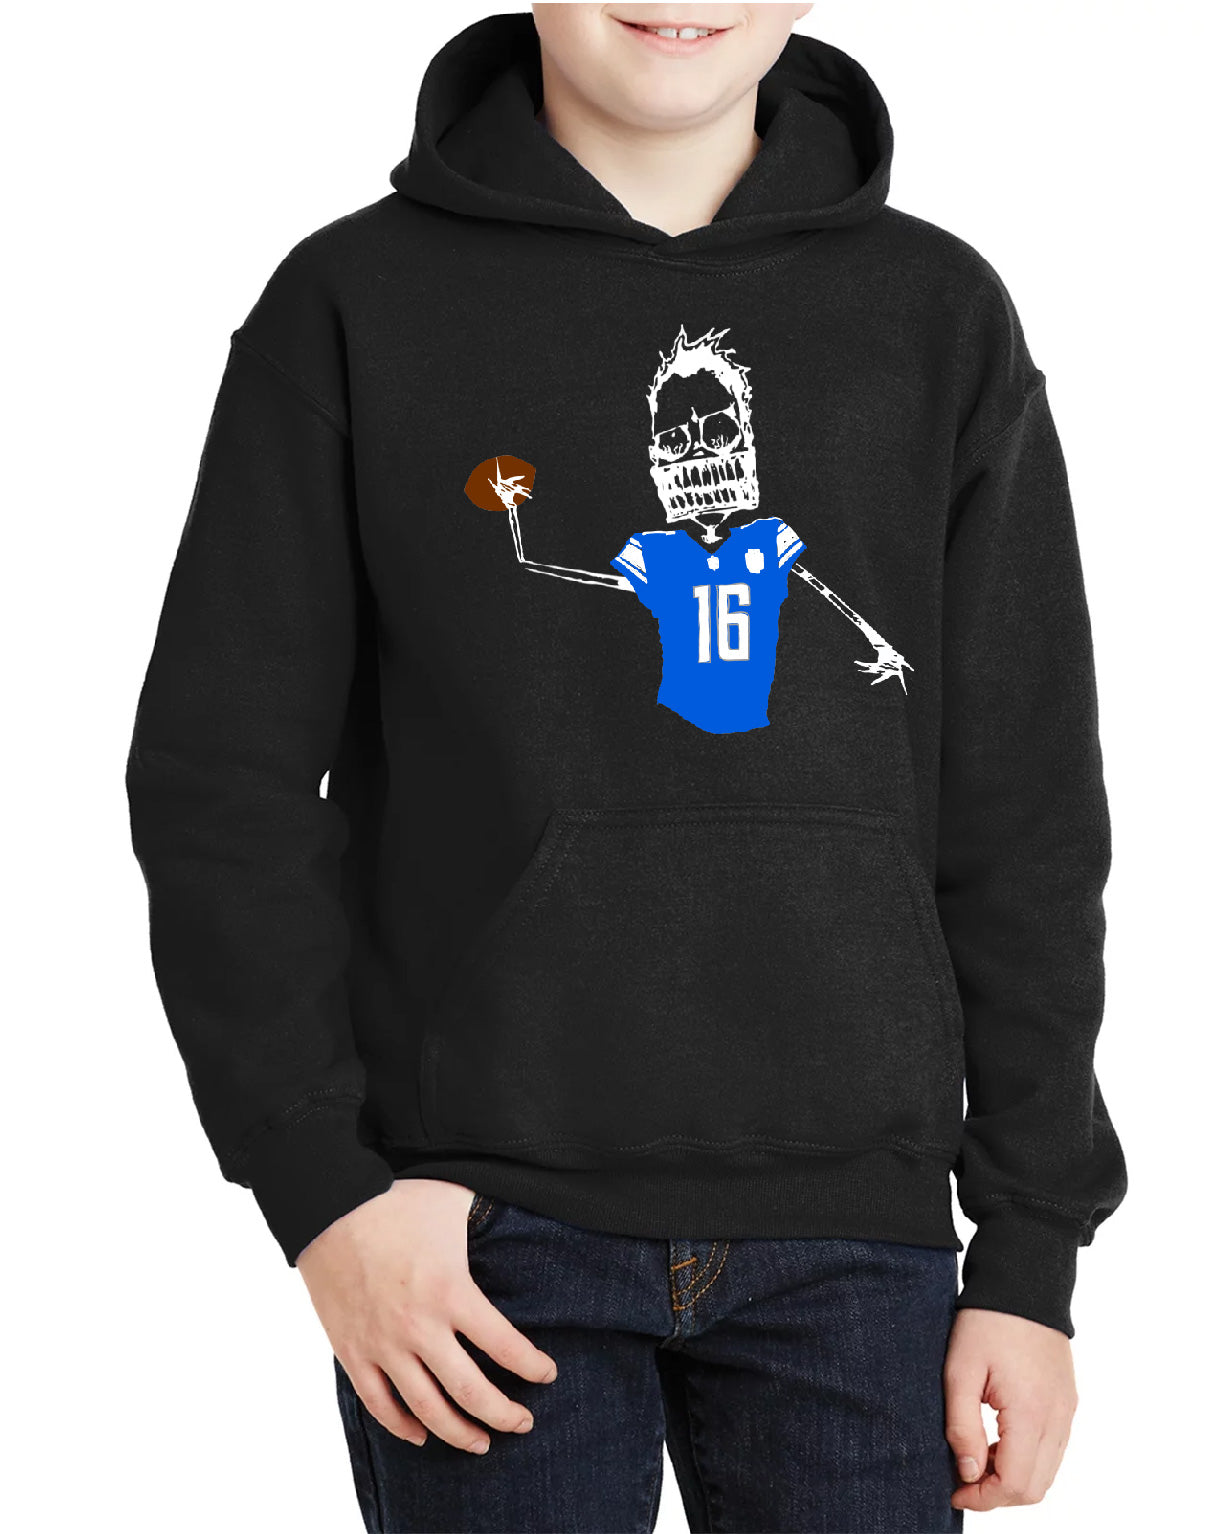 LIONS x TIC limited edition hoodie kids